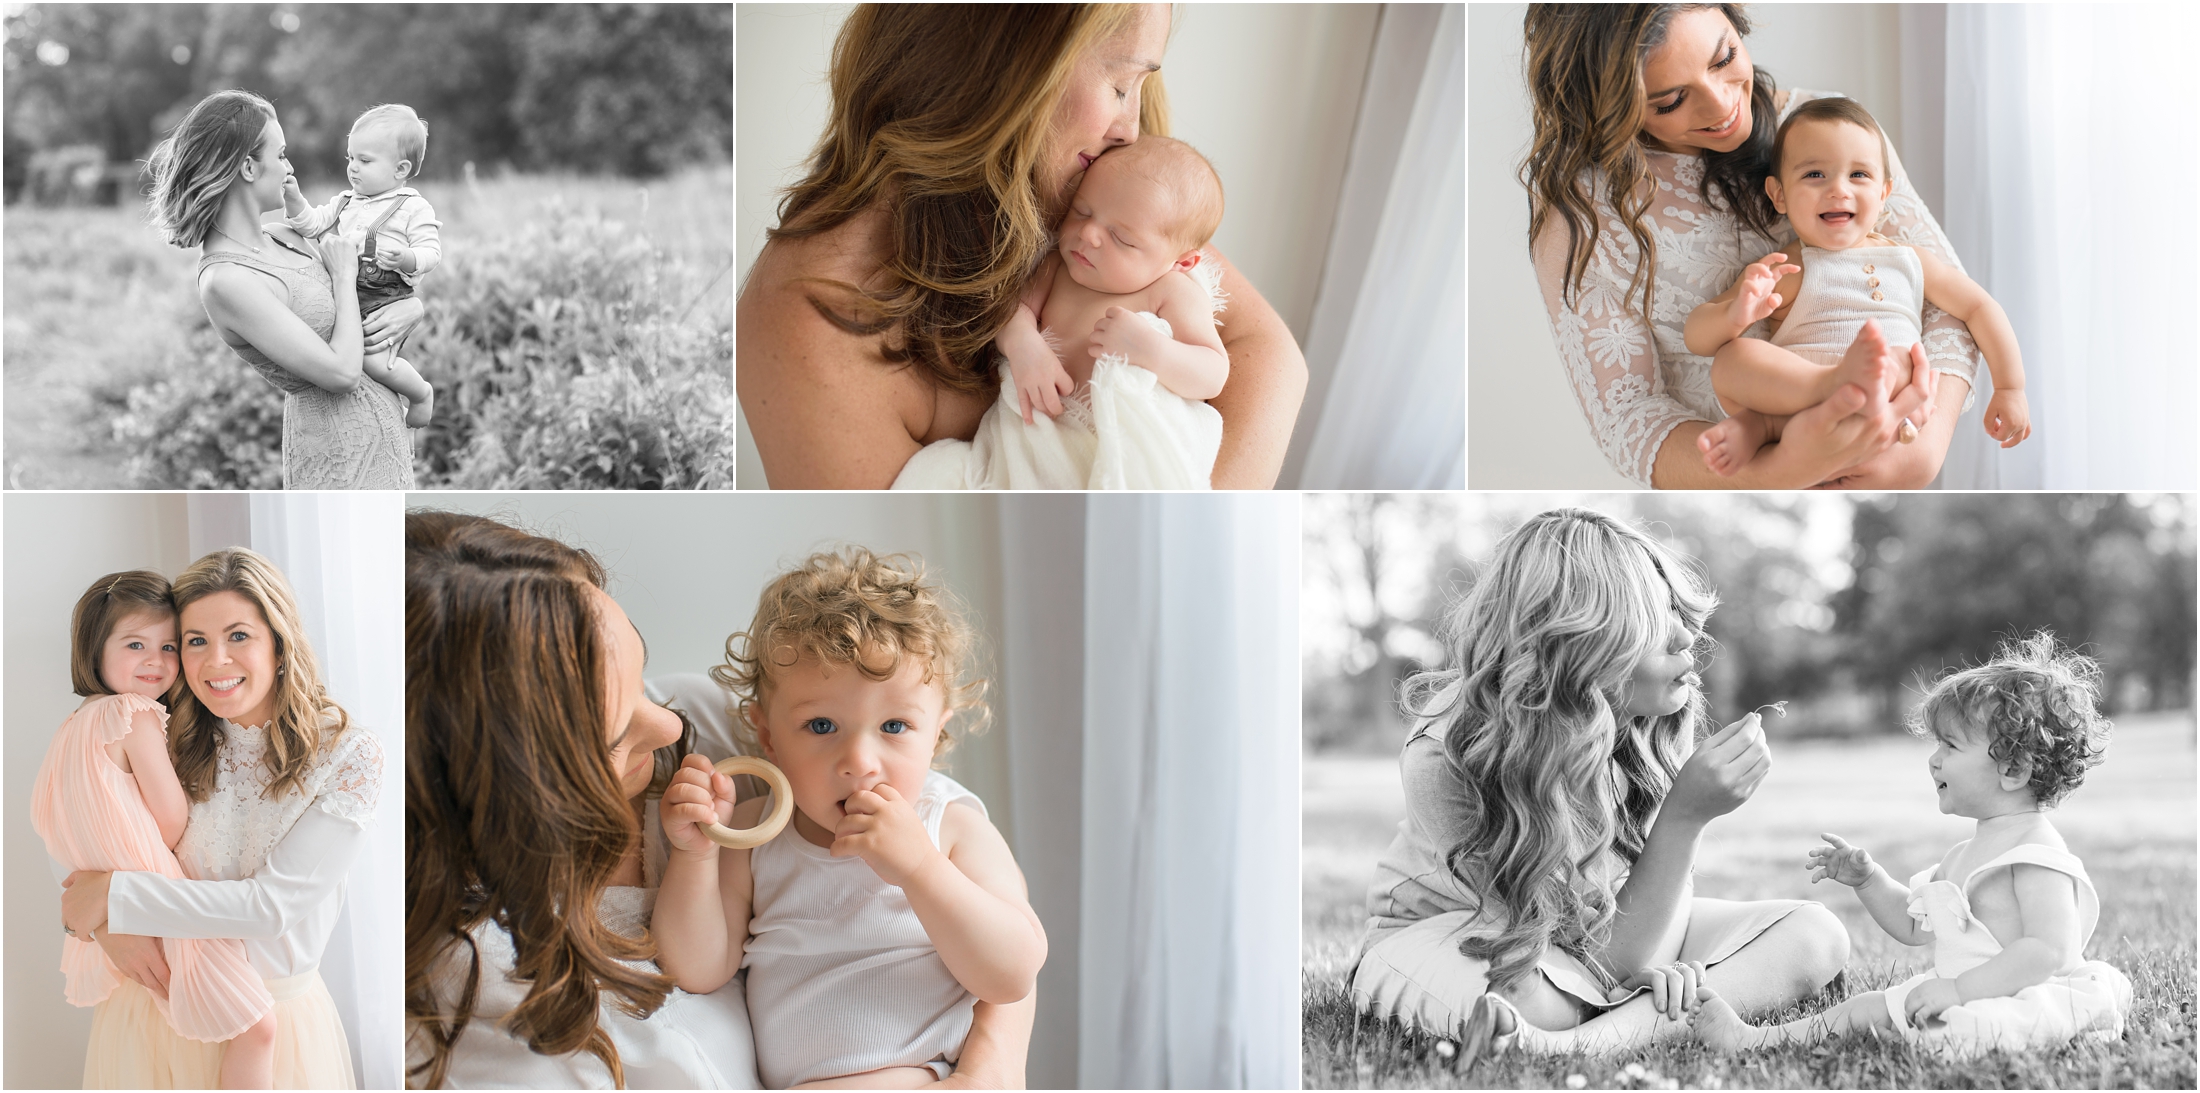 Mommy and Me photo sessions in West Hartford, Simsbury, Canton, Avon and Farmington Valley CT.